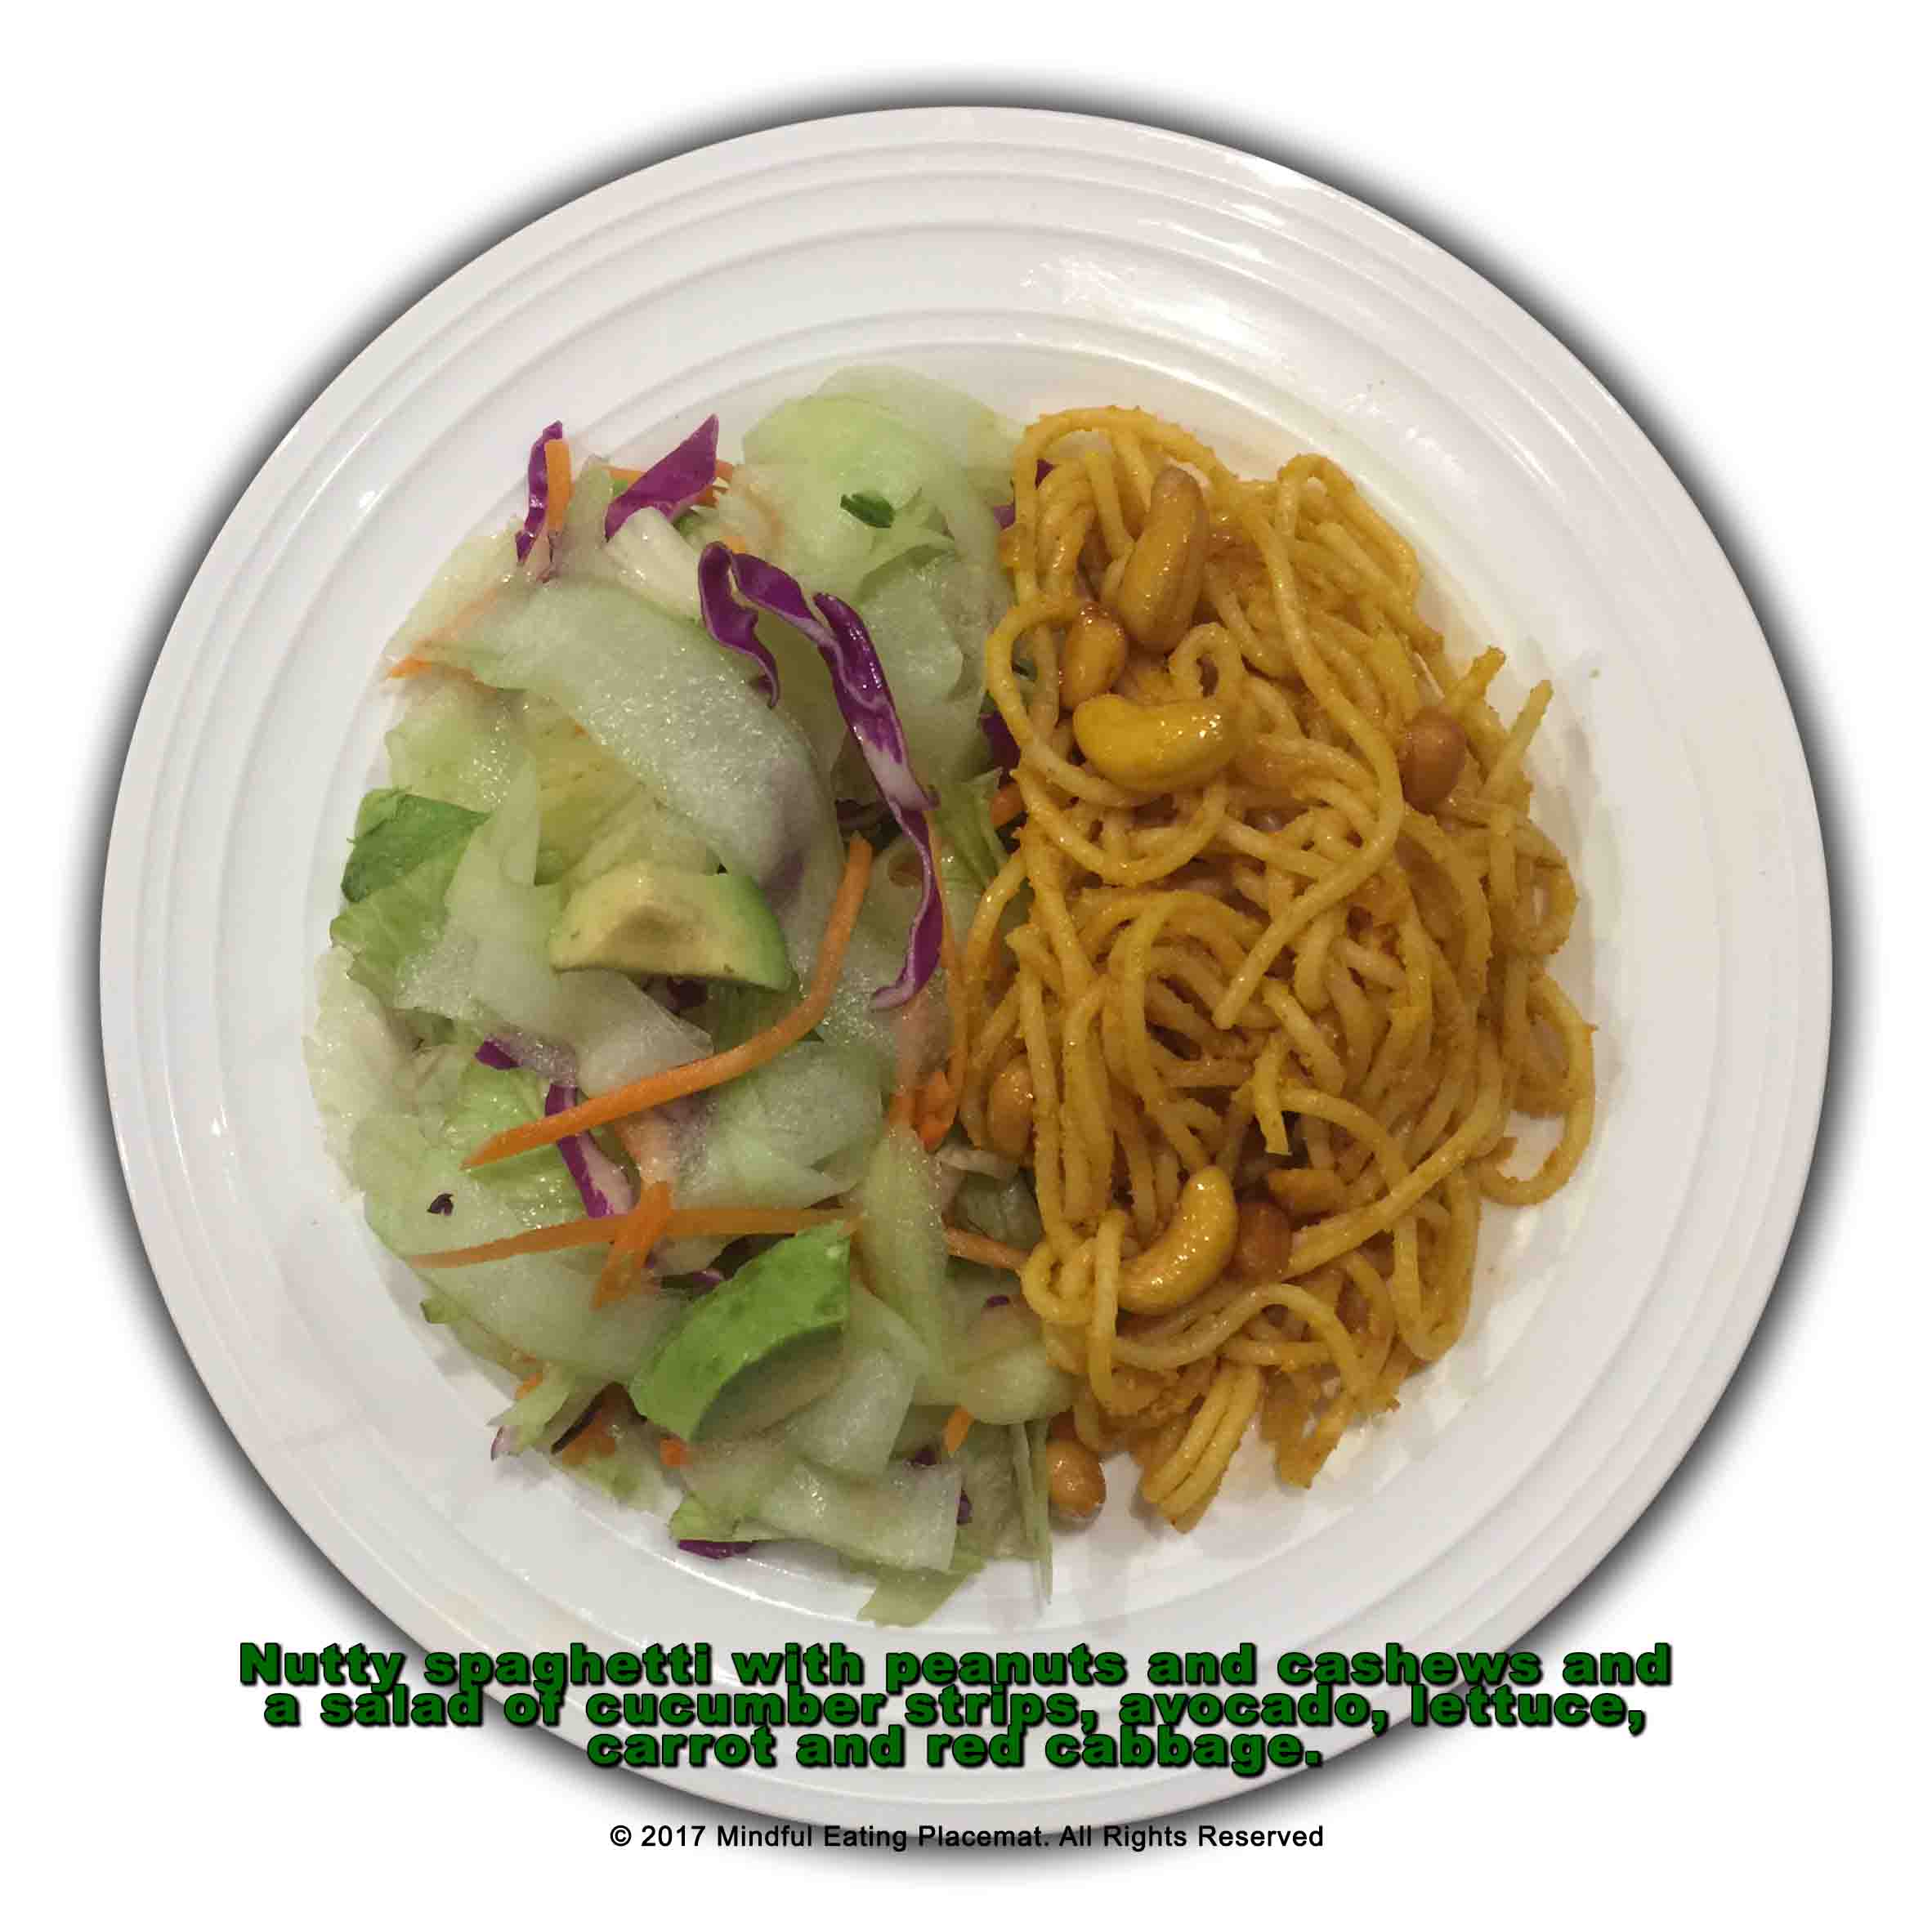 Nutty spaghetti with peanuts and cashews with a cucumber and avocado salad 